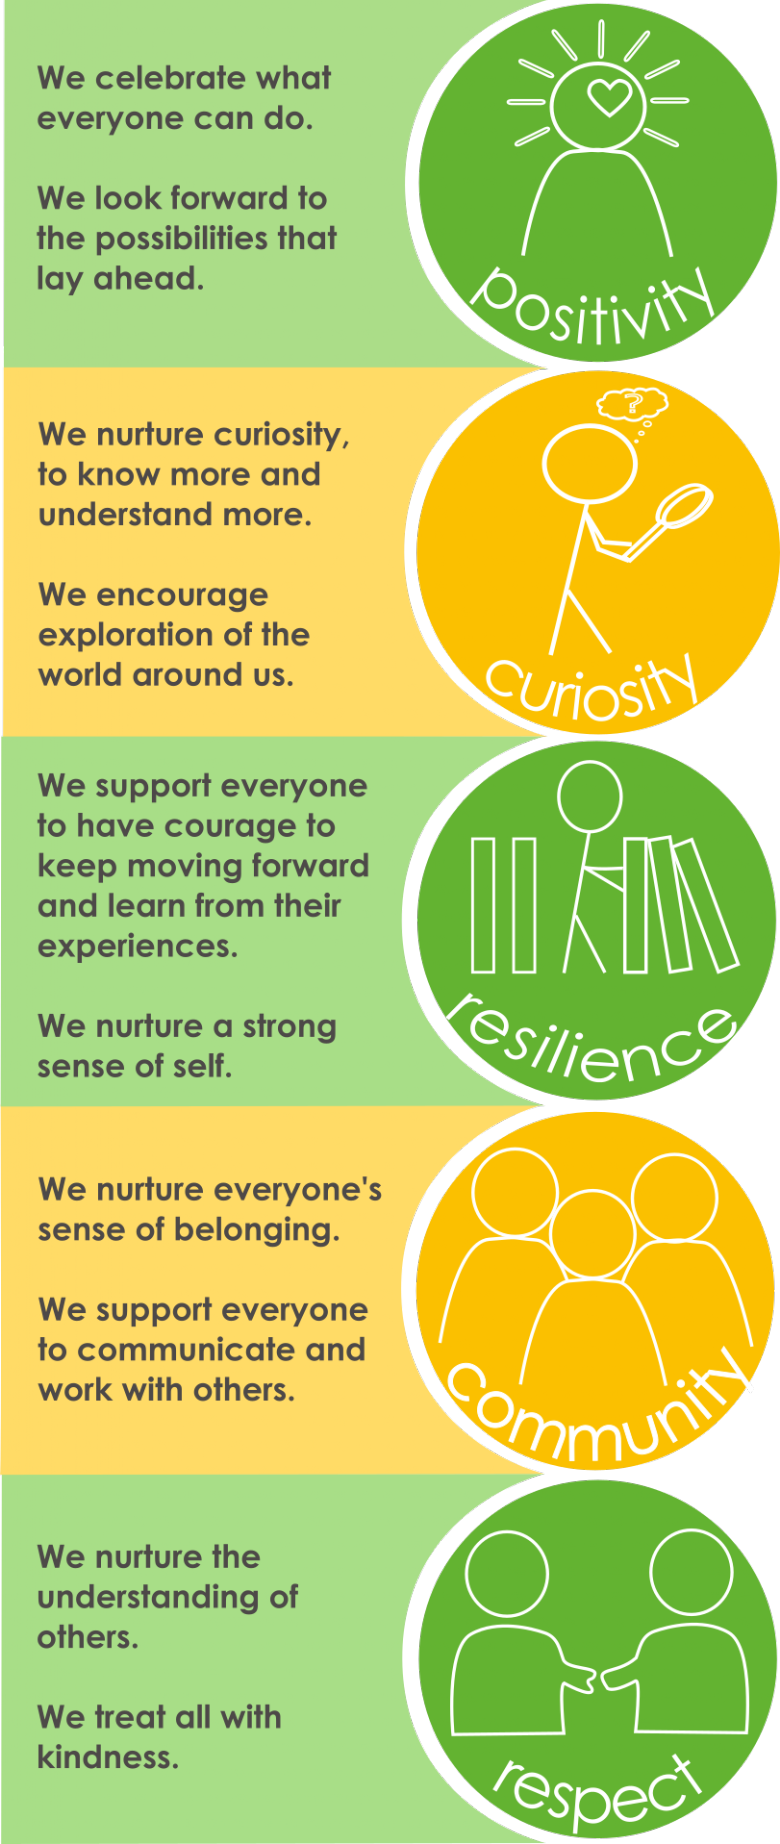 A summary of our 5 core values. 